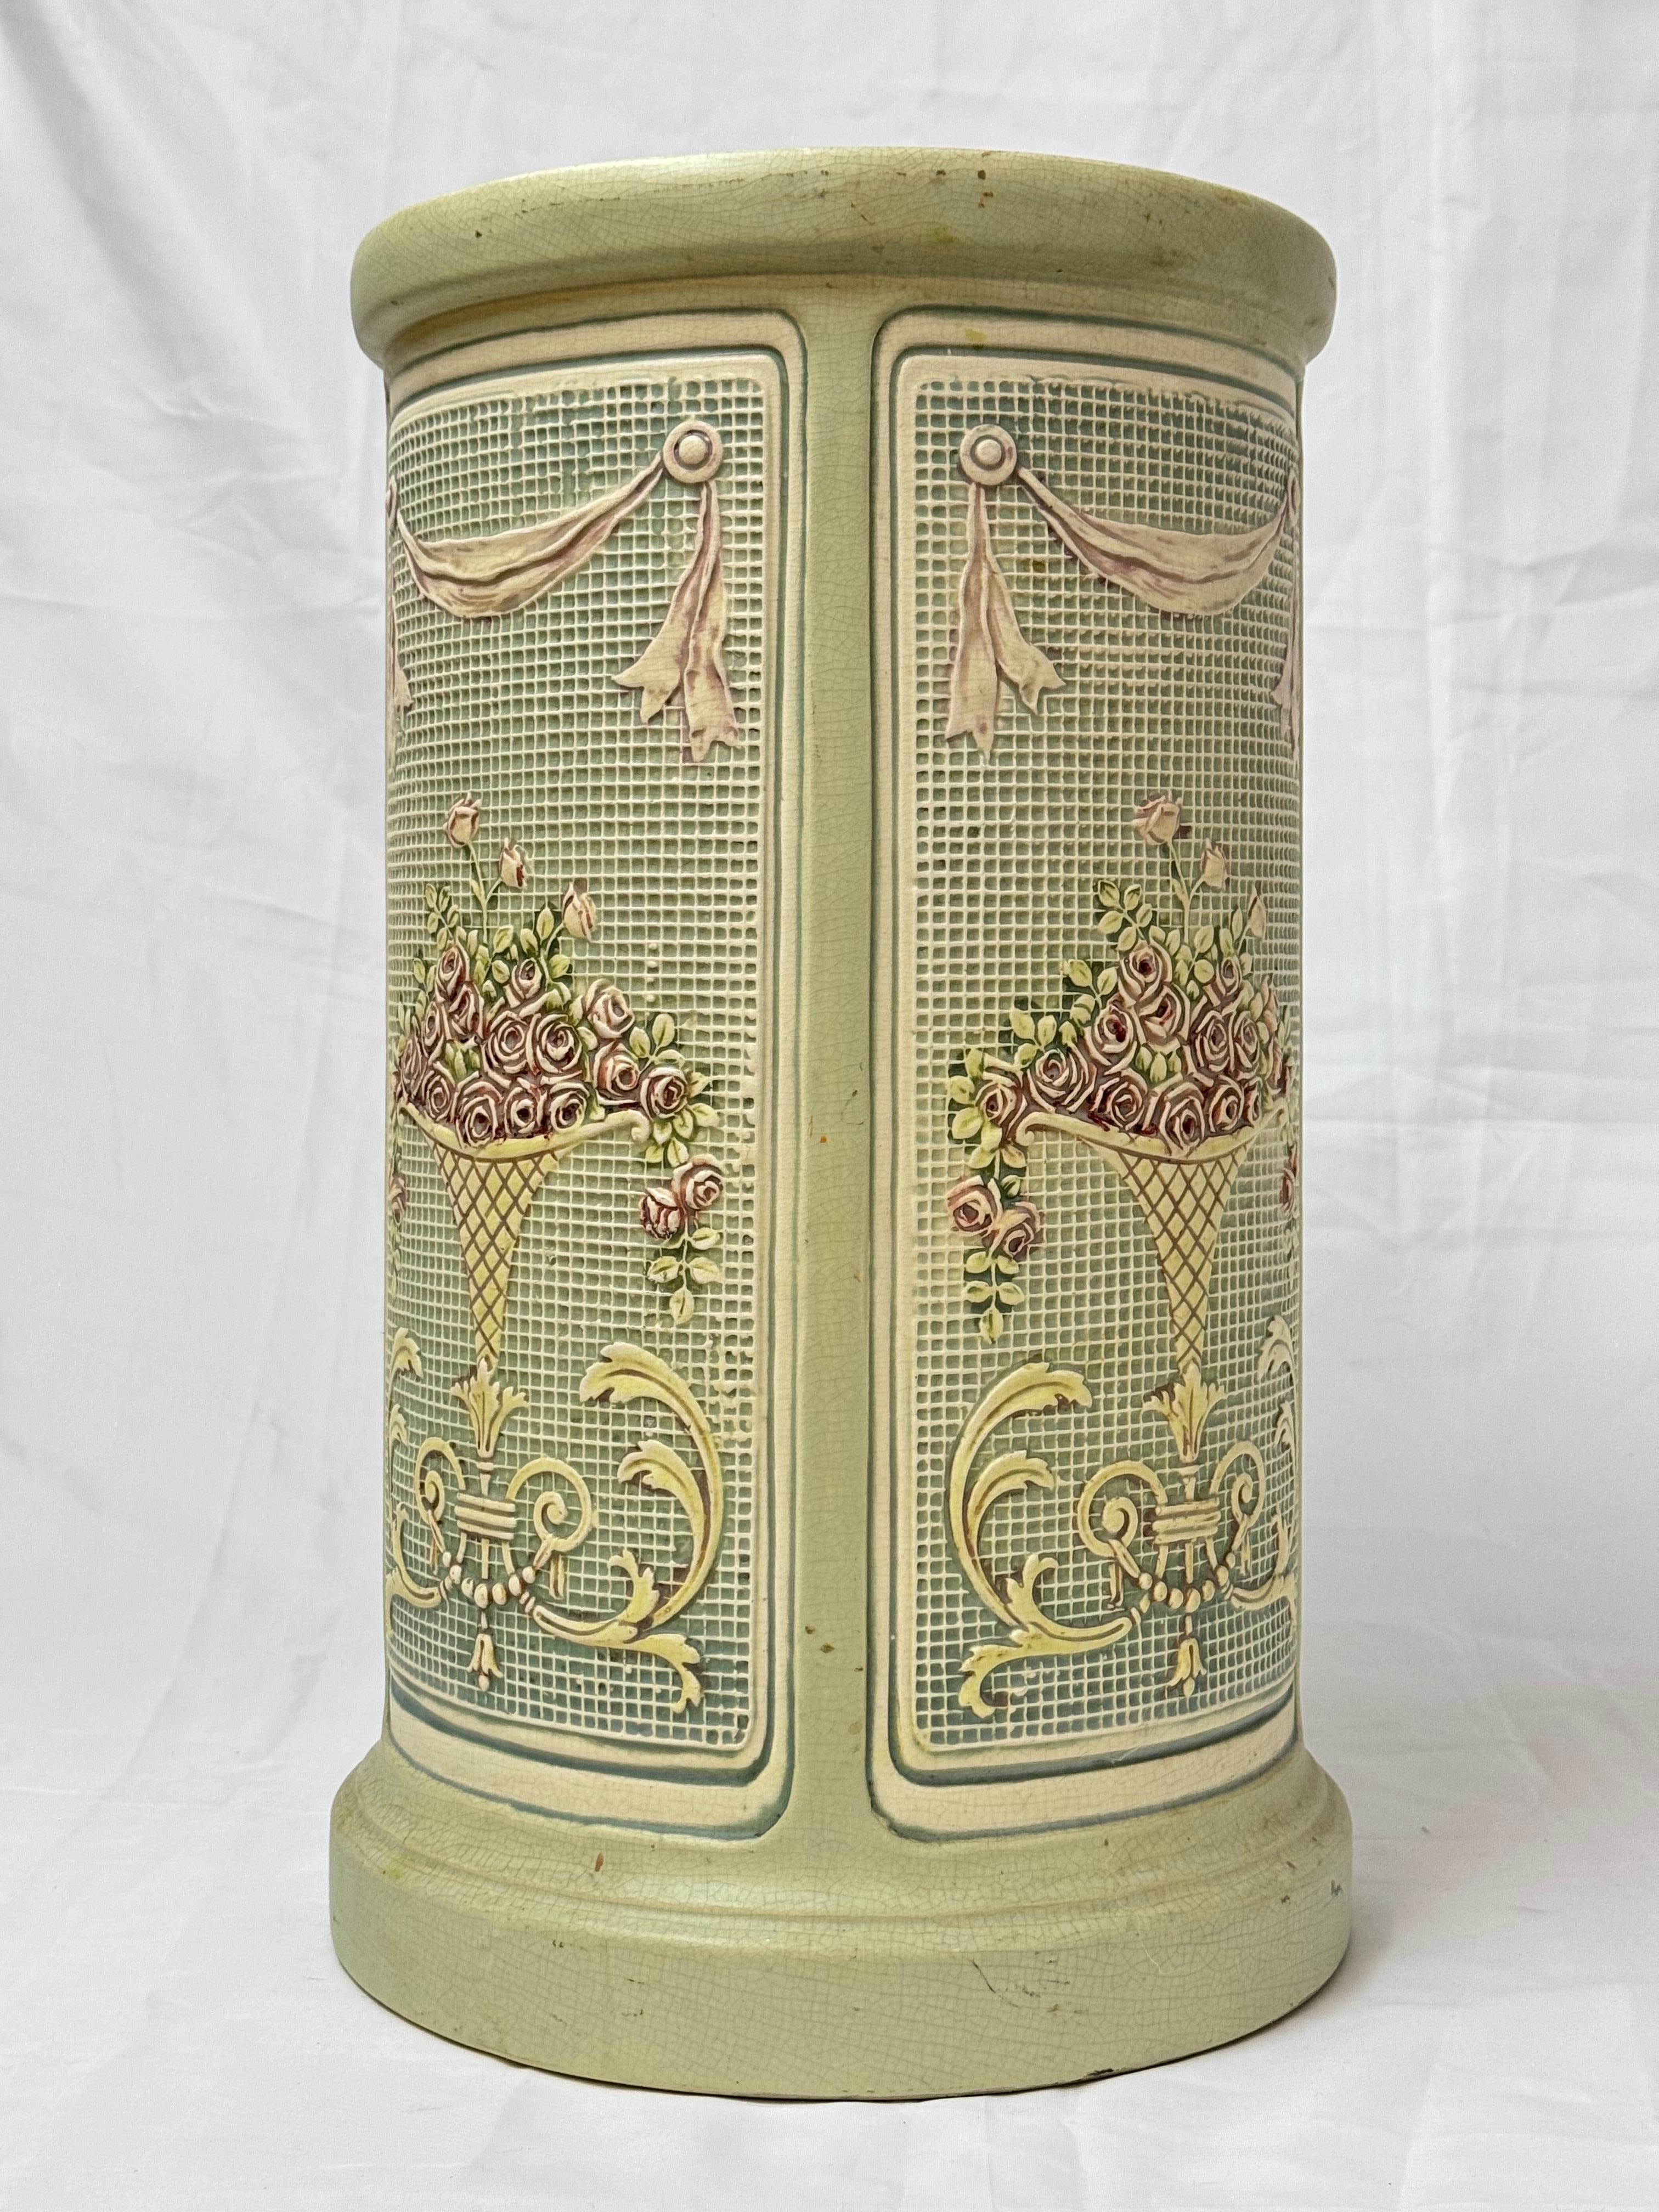 Rare and Collectible Weller Dupont Jardiniere For Sale 12